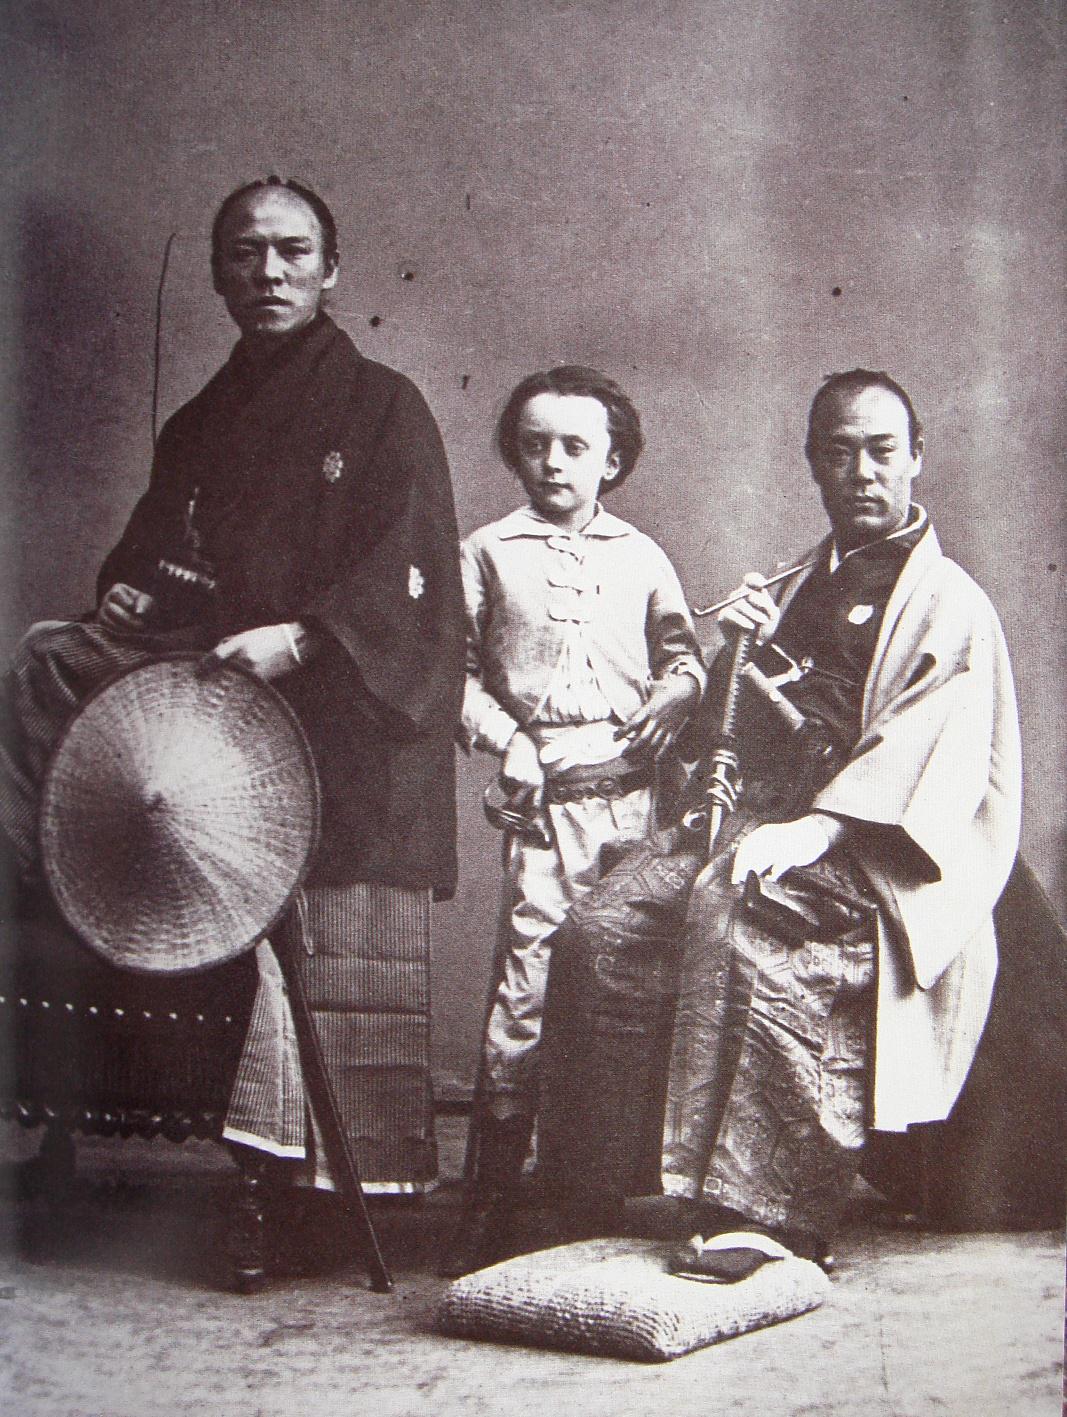 A young Paul Nadar (french photographer) poses with his own sword alongside 2 samurai in 1863, photo taken by his father, Nadar.jpg